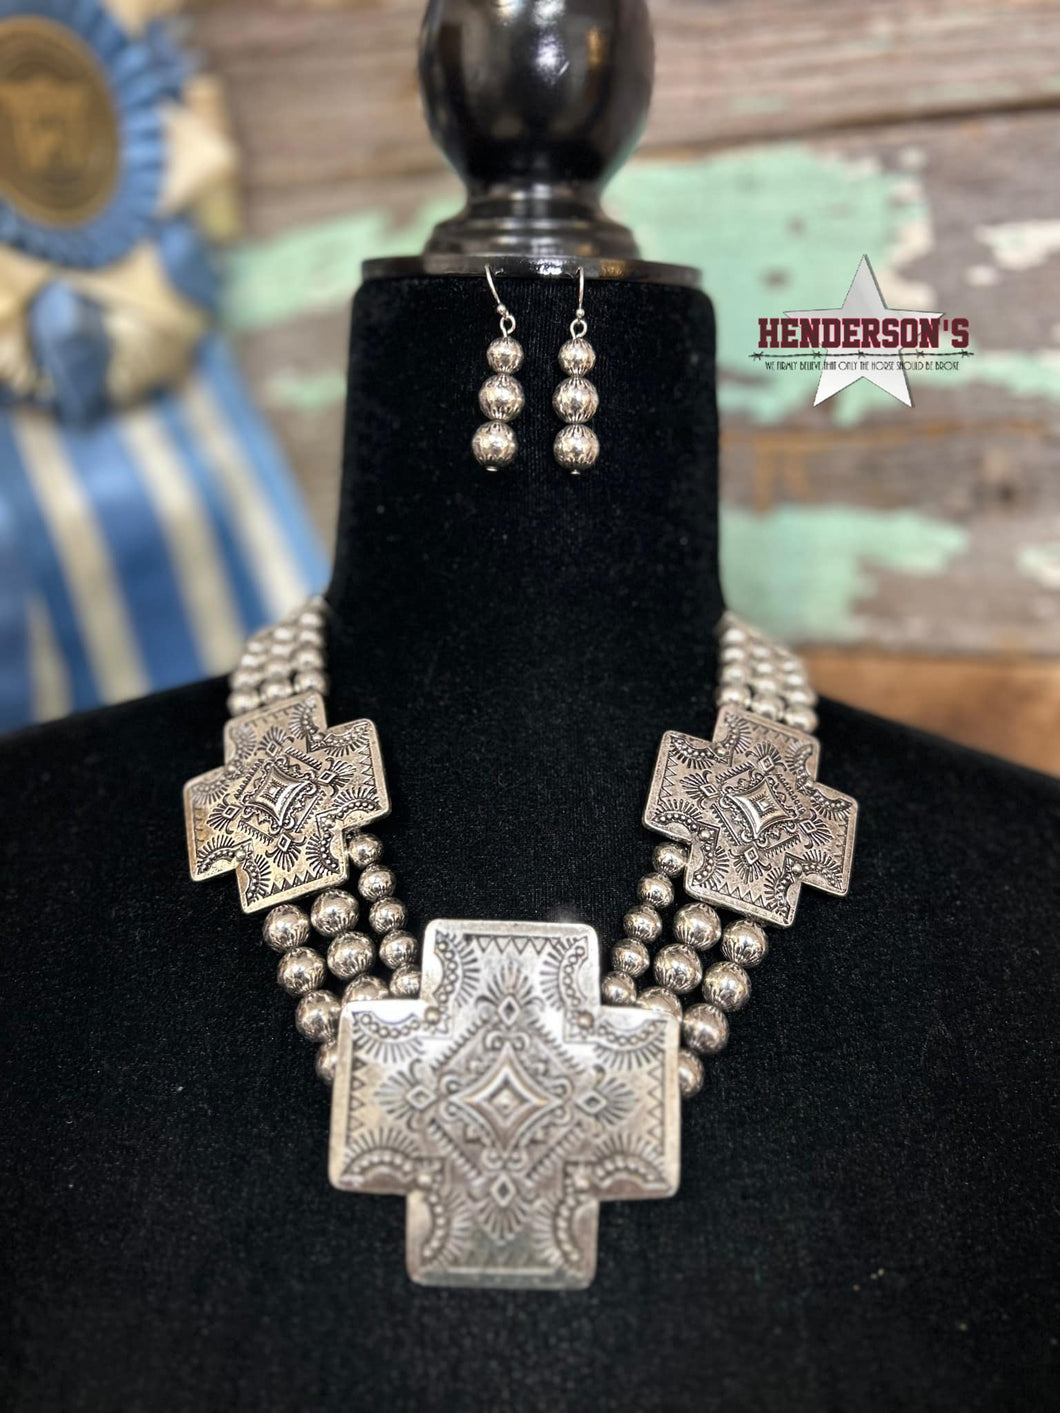 Western Aztec Chunk Necklace - Henderson's Western Store